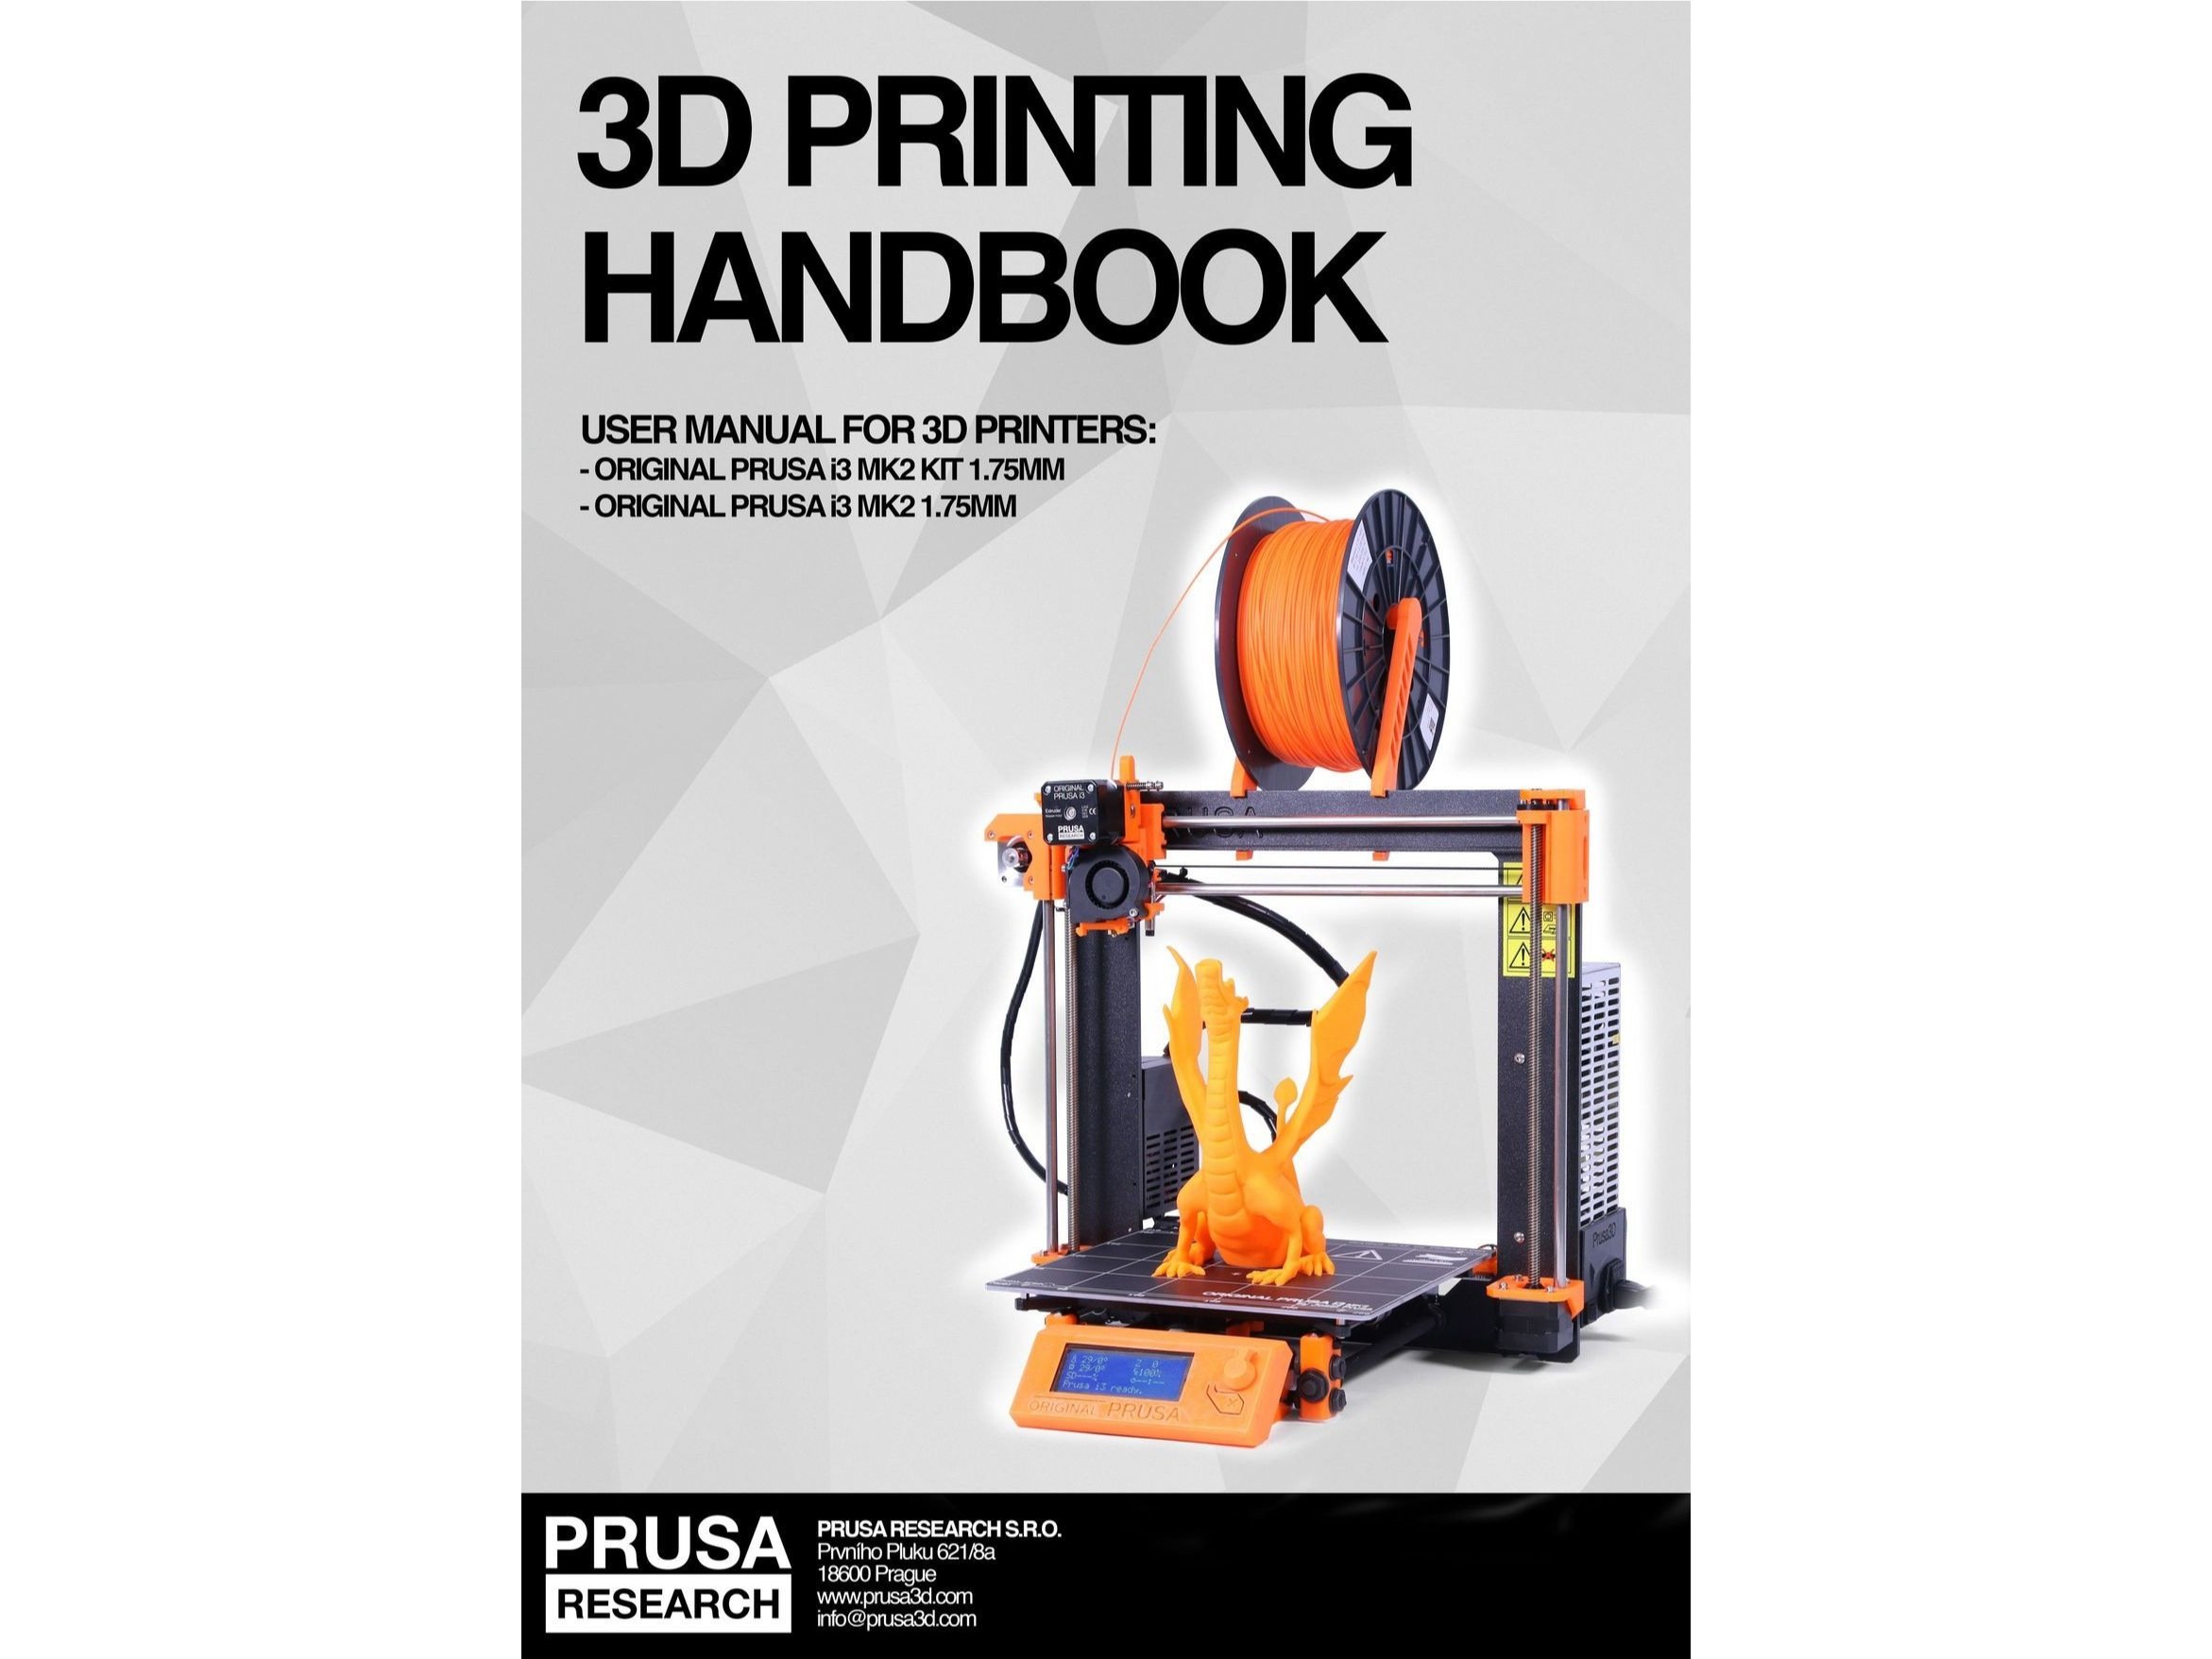 Quick guide for your first prints